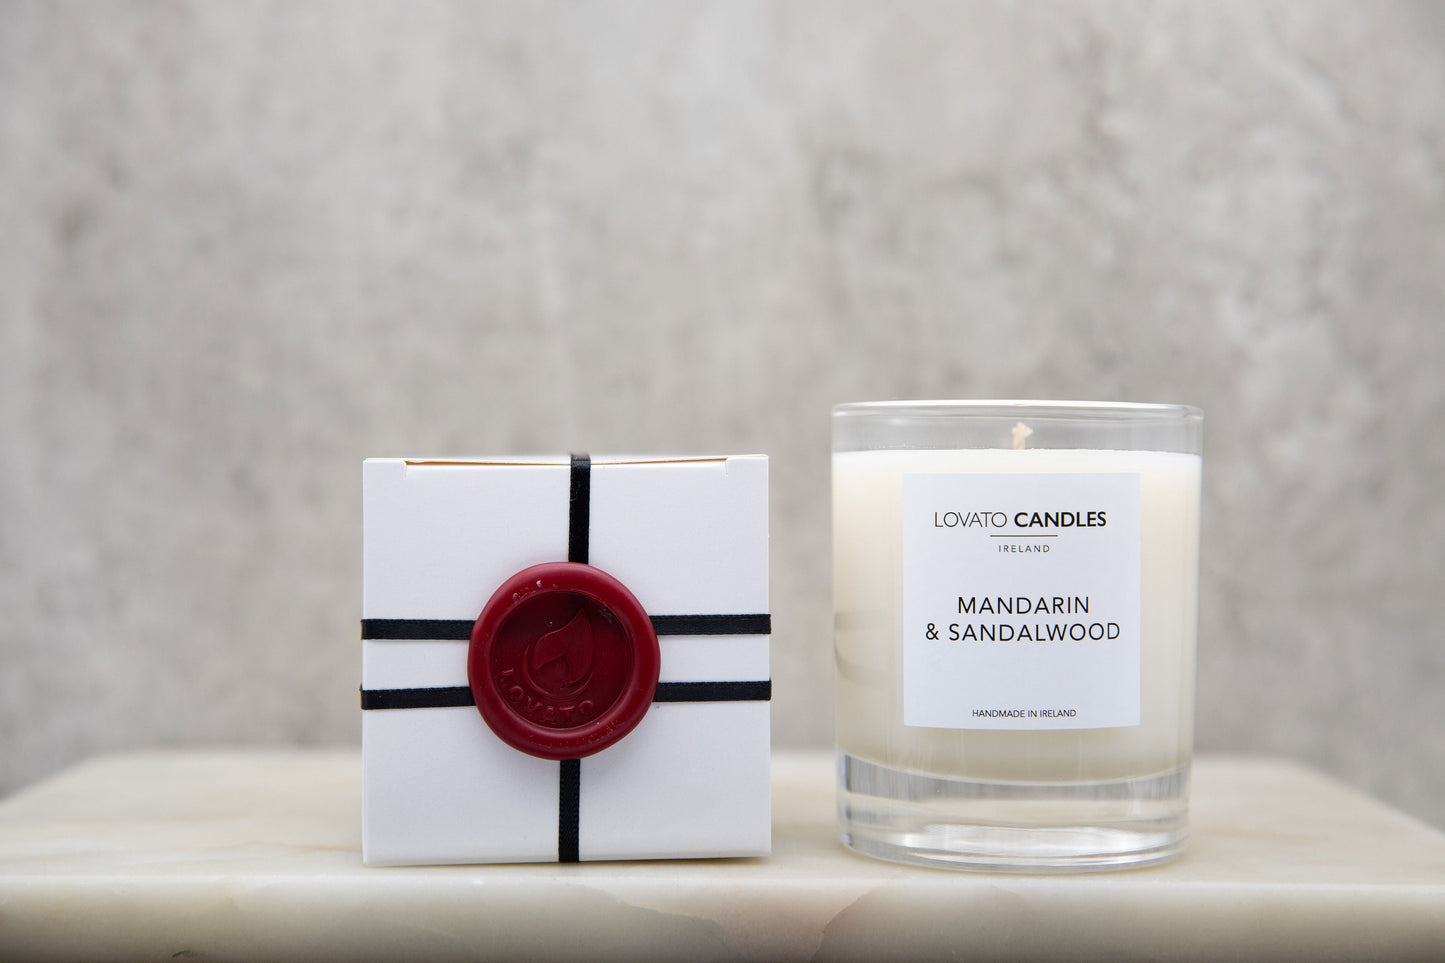 Clear Scented Candle with Luxury White Box - Mandarin & Sandalwood